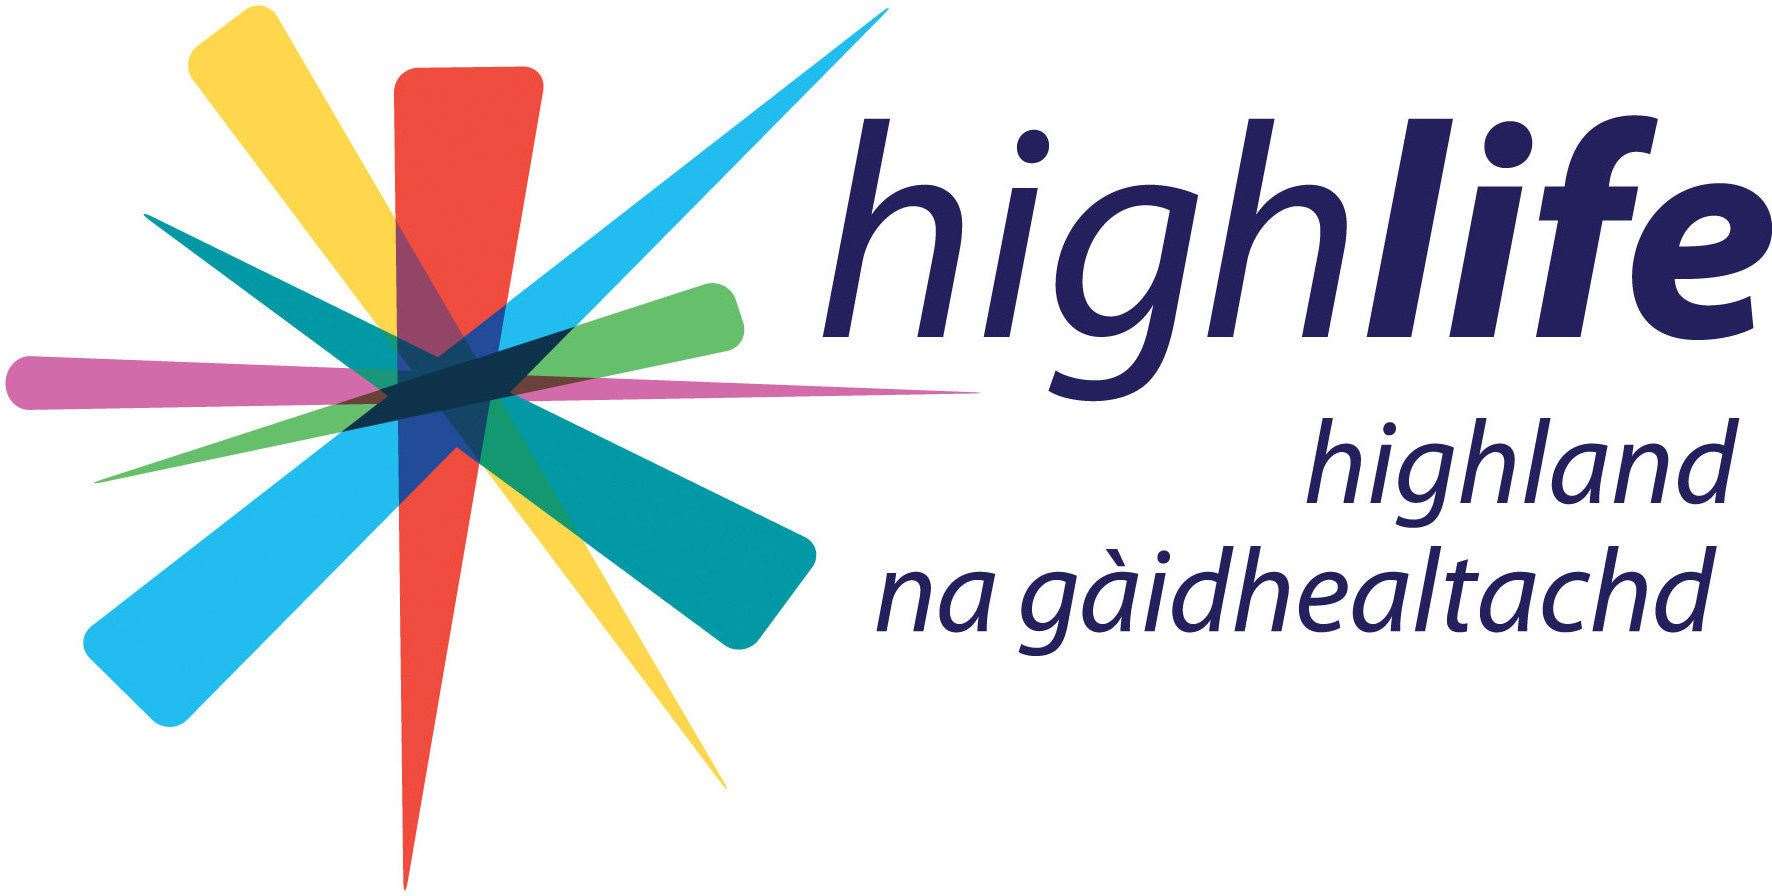 High Life Highland is responsible for the Highland Archive Centre.